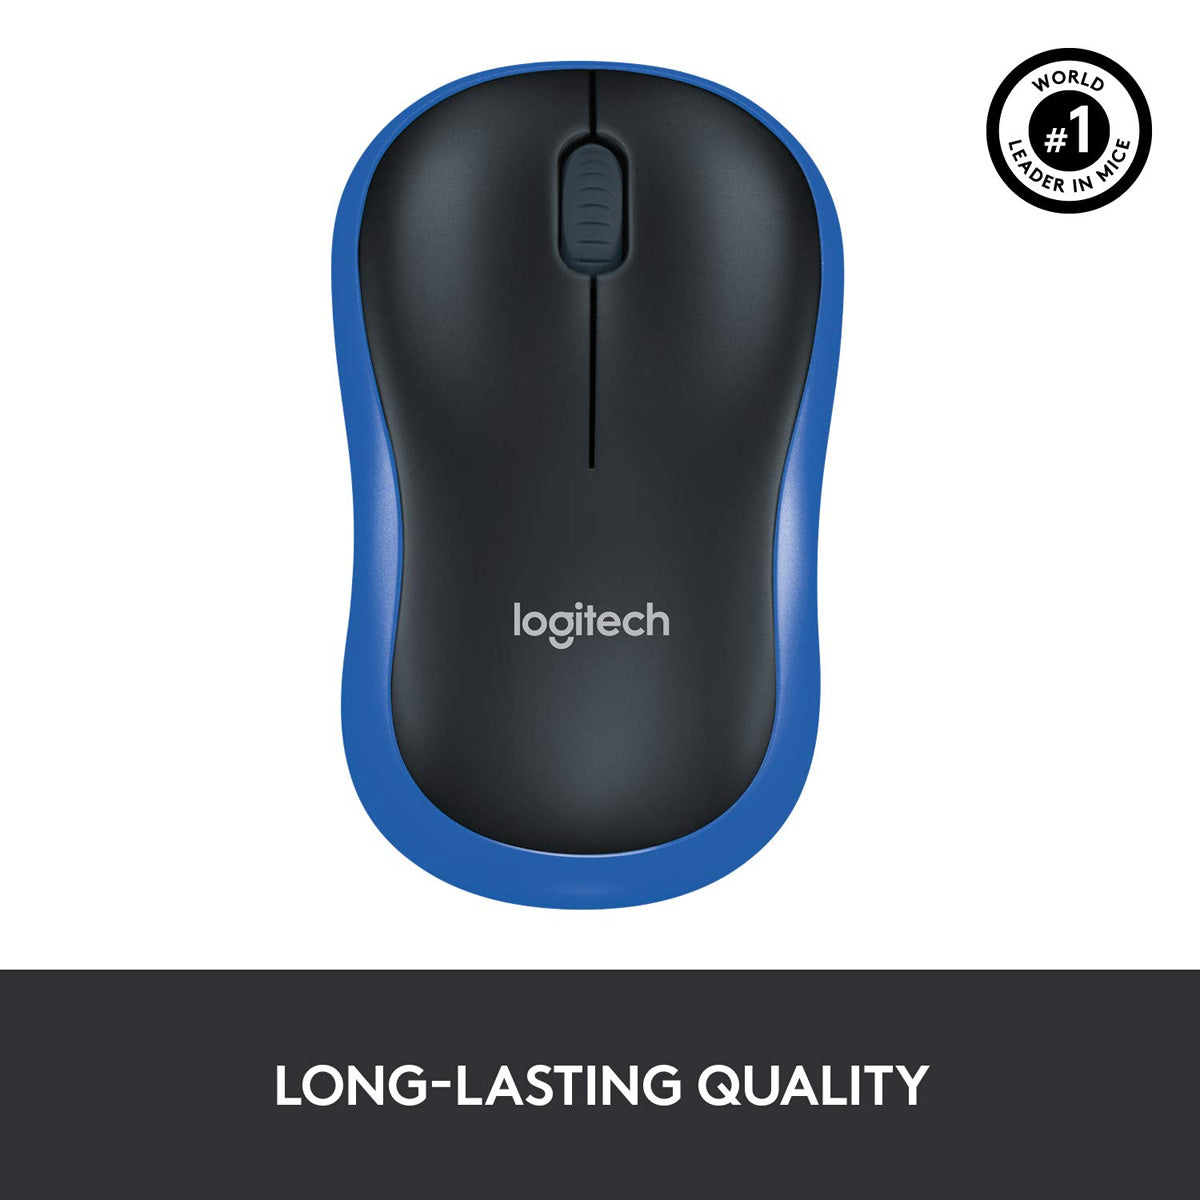 Logitech M185 Wireless Optical Mouse with 2.4 Ghz Technology and 12 Month Battery Life